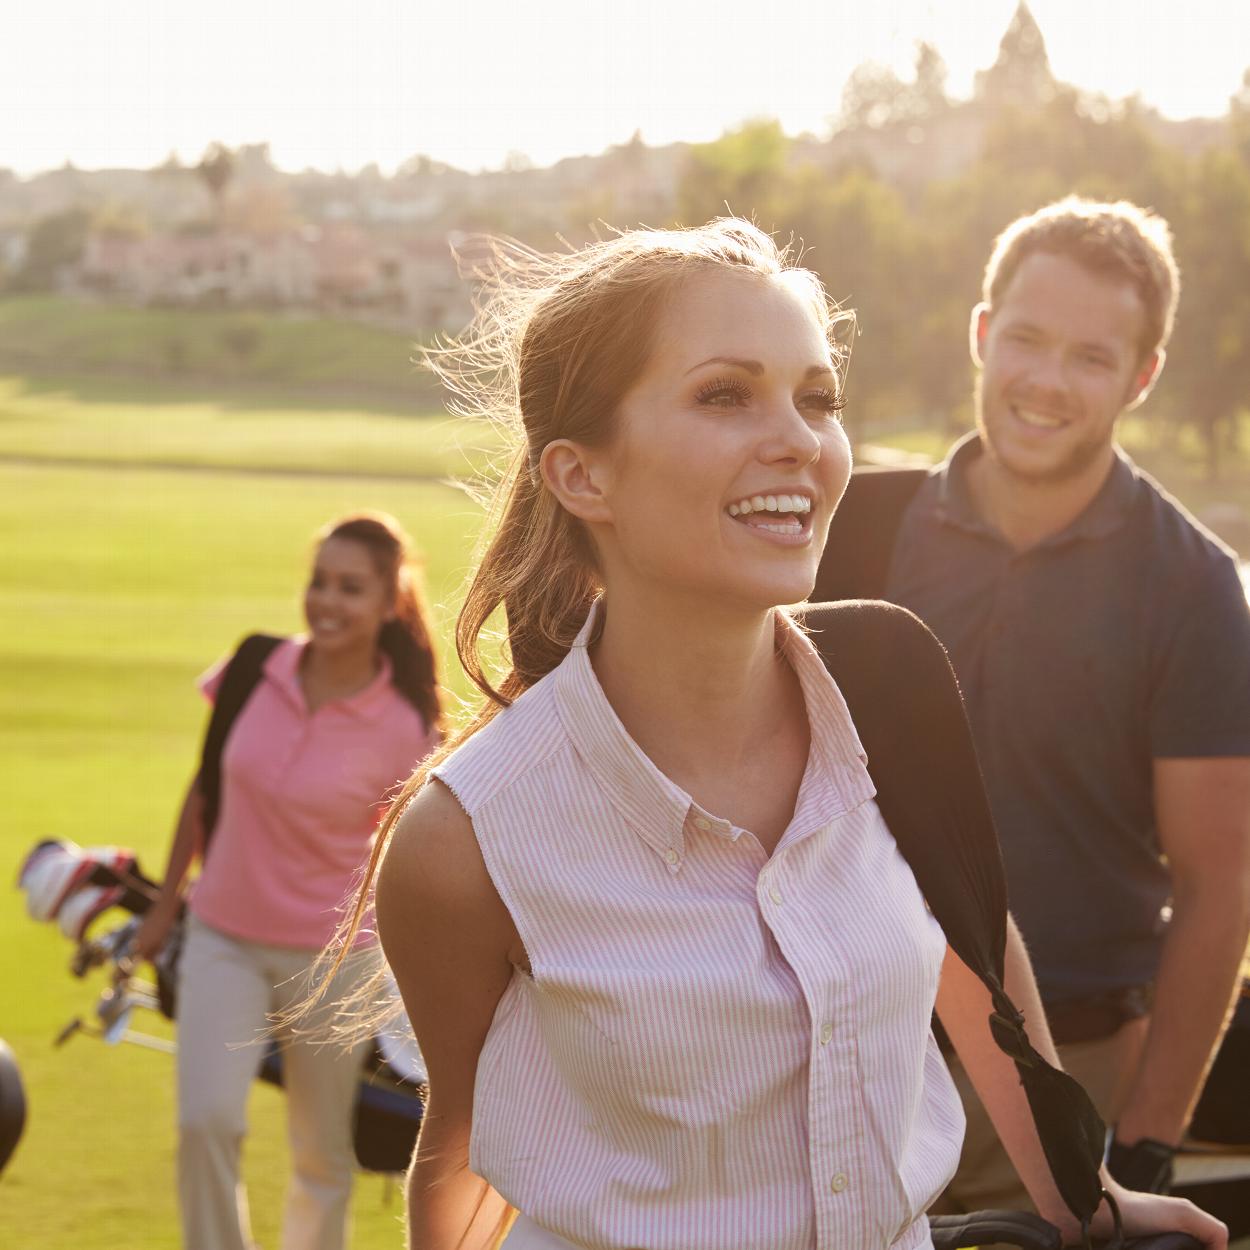 Woman and friends walking with golfing bags